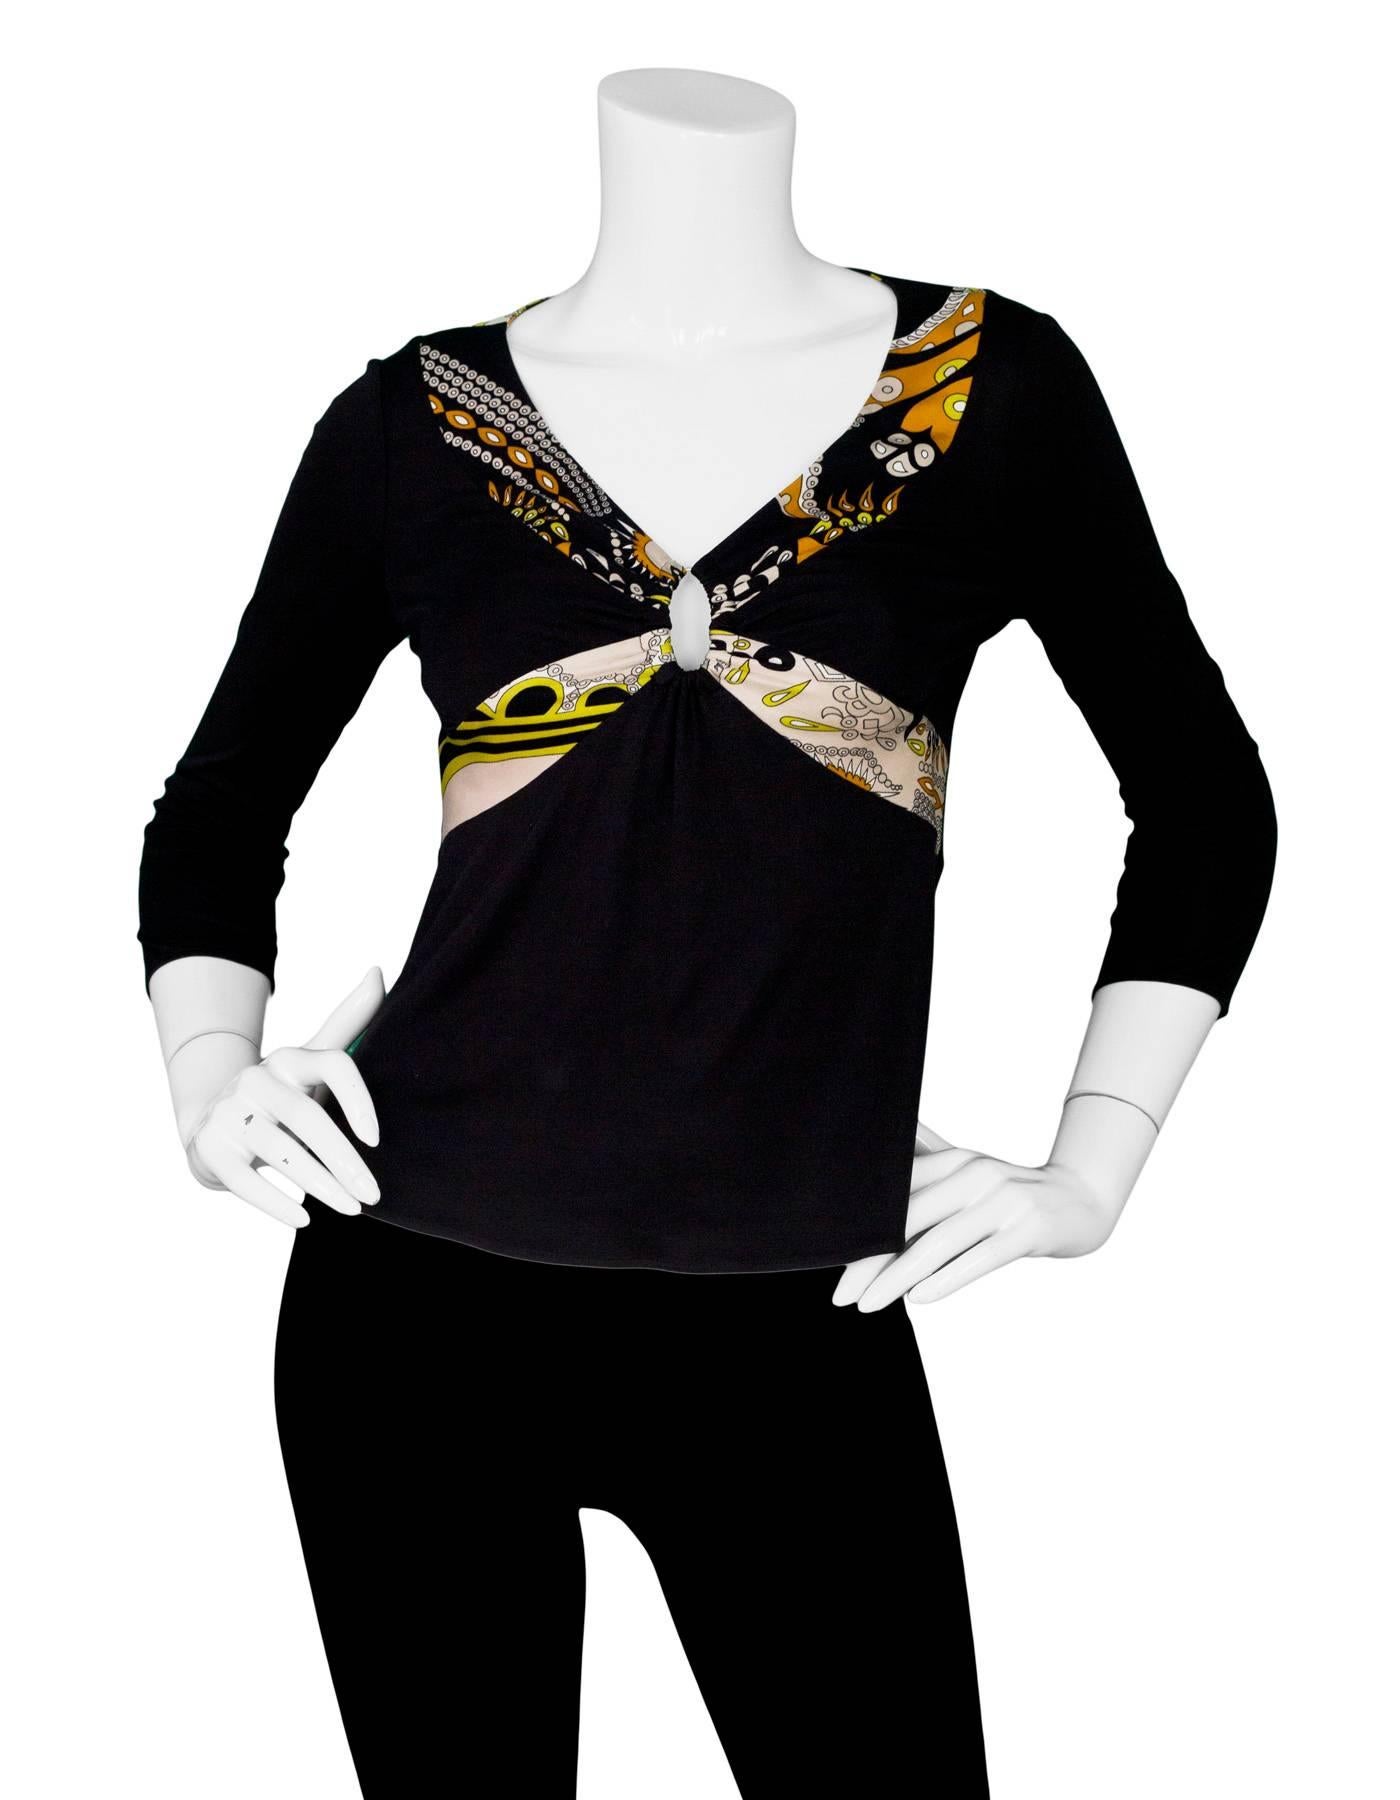 Emilio Pucci Black Silk Top with Keyhole Sz 6

Made In: Italy
Color: Black, beige, rust
Composition: 100% silk
Lining: None
Closure/Opening: Pull over
Overall Condition: Excellent pre-owned condition, general wear
Marked Size: 6
Bust: 30